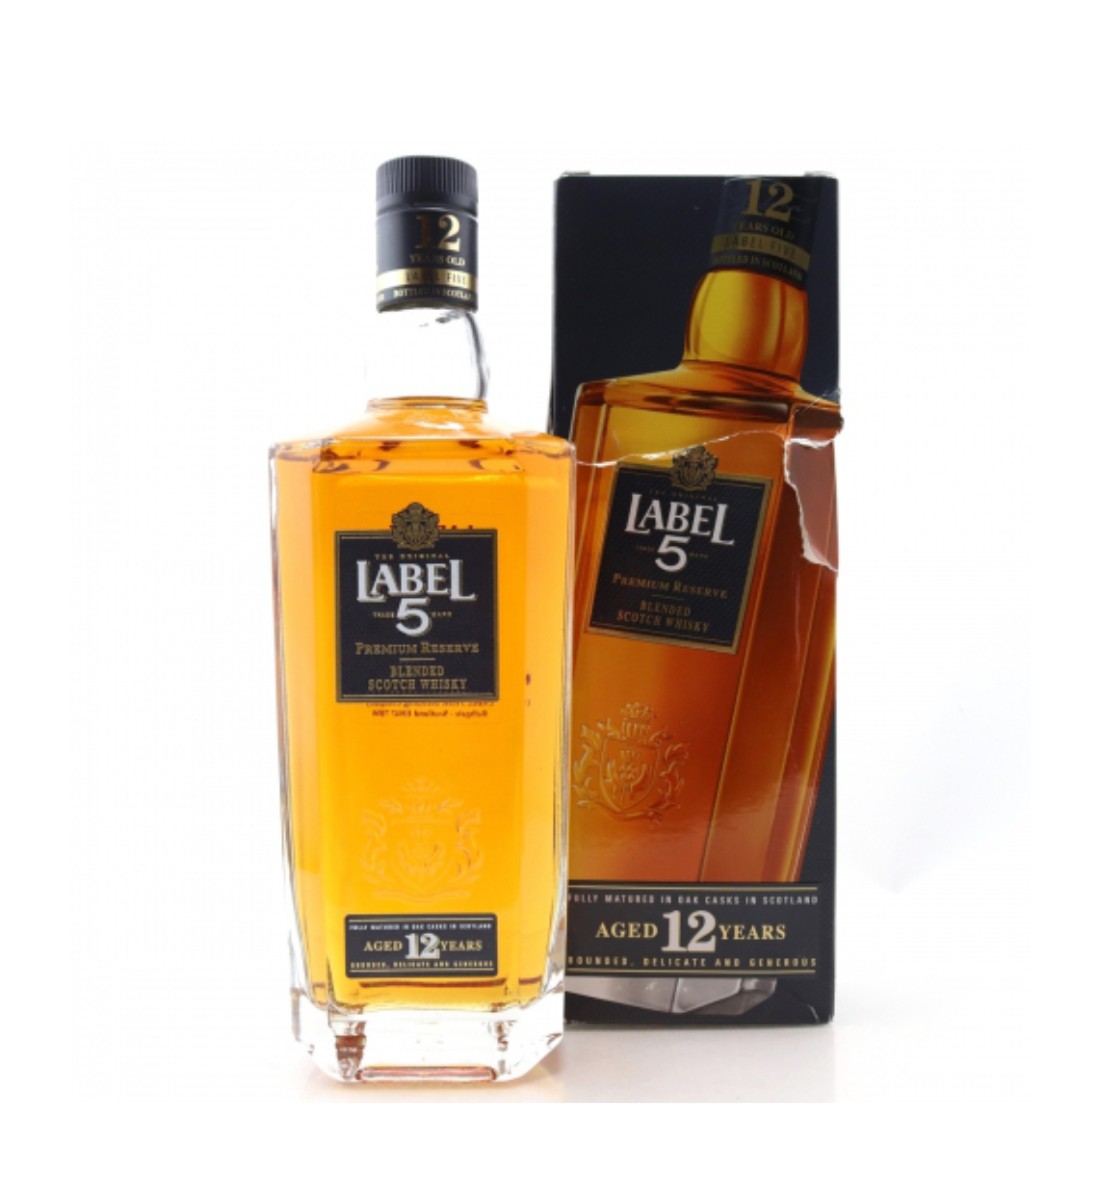 Label 5 Whisky Price Malaysia